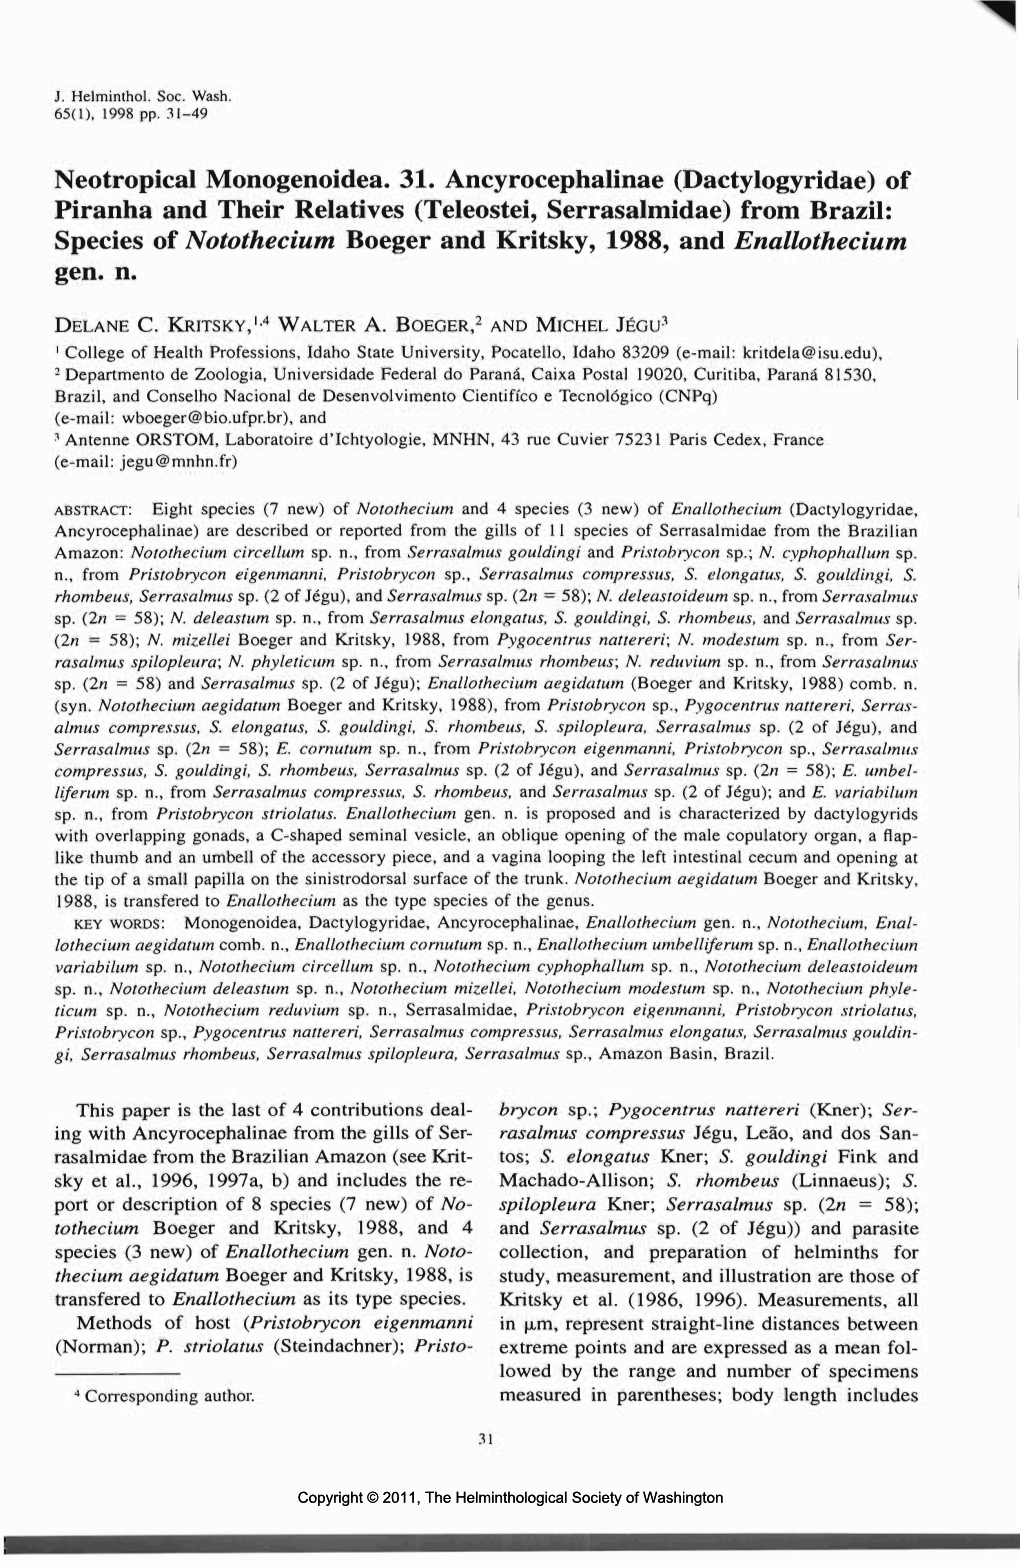 (Dactylogyridae) of Piranha and Their Relatives (Teleostei, Serrasalmidae) from Brazil: Species of Notothecium Boeger and Kritsky, 1988, and Enallothecium Gen